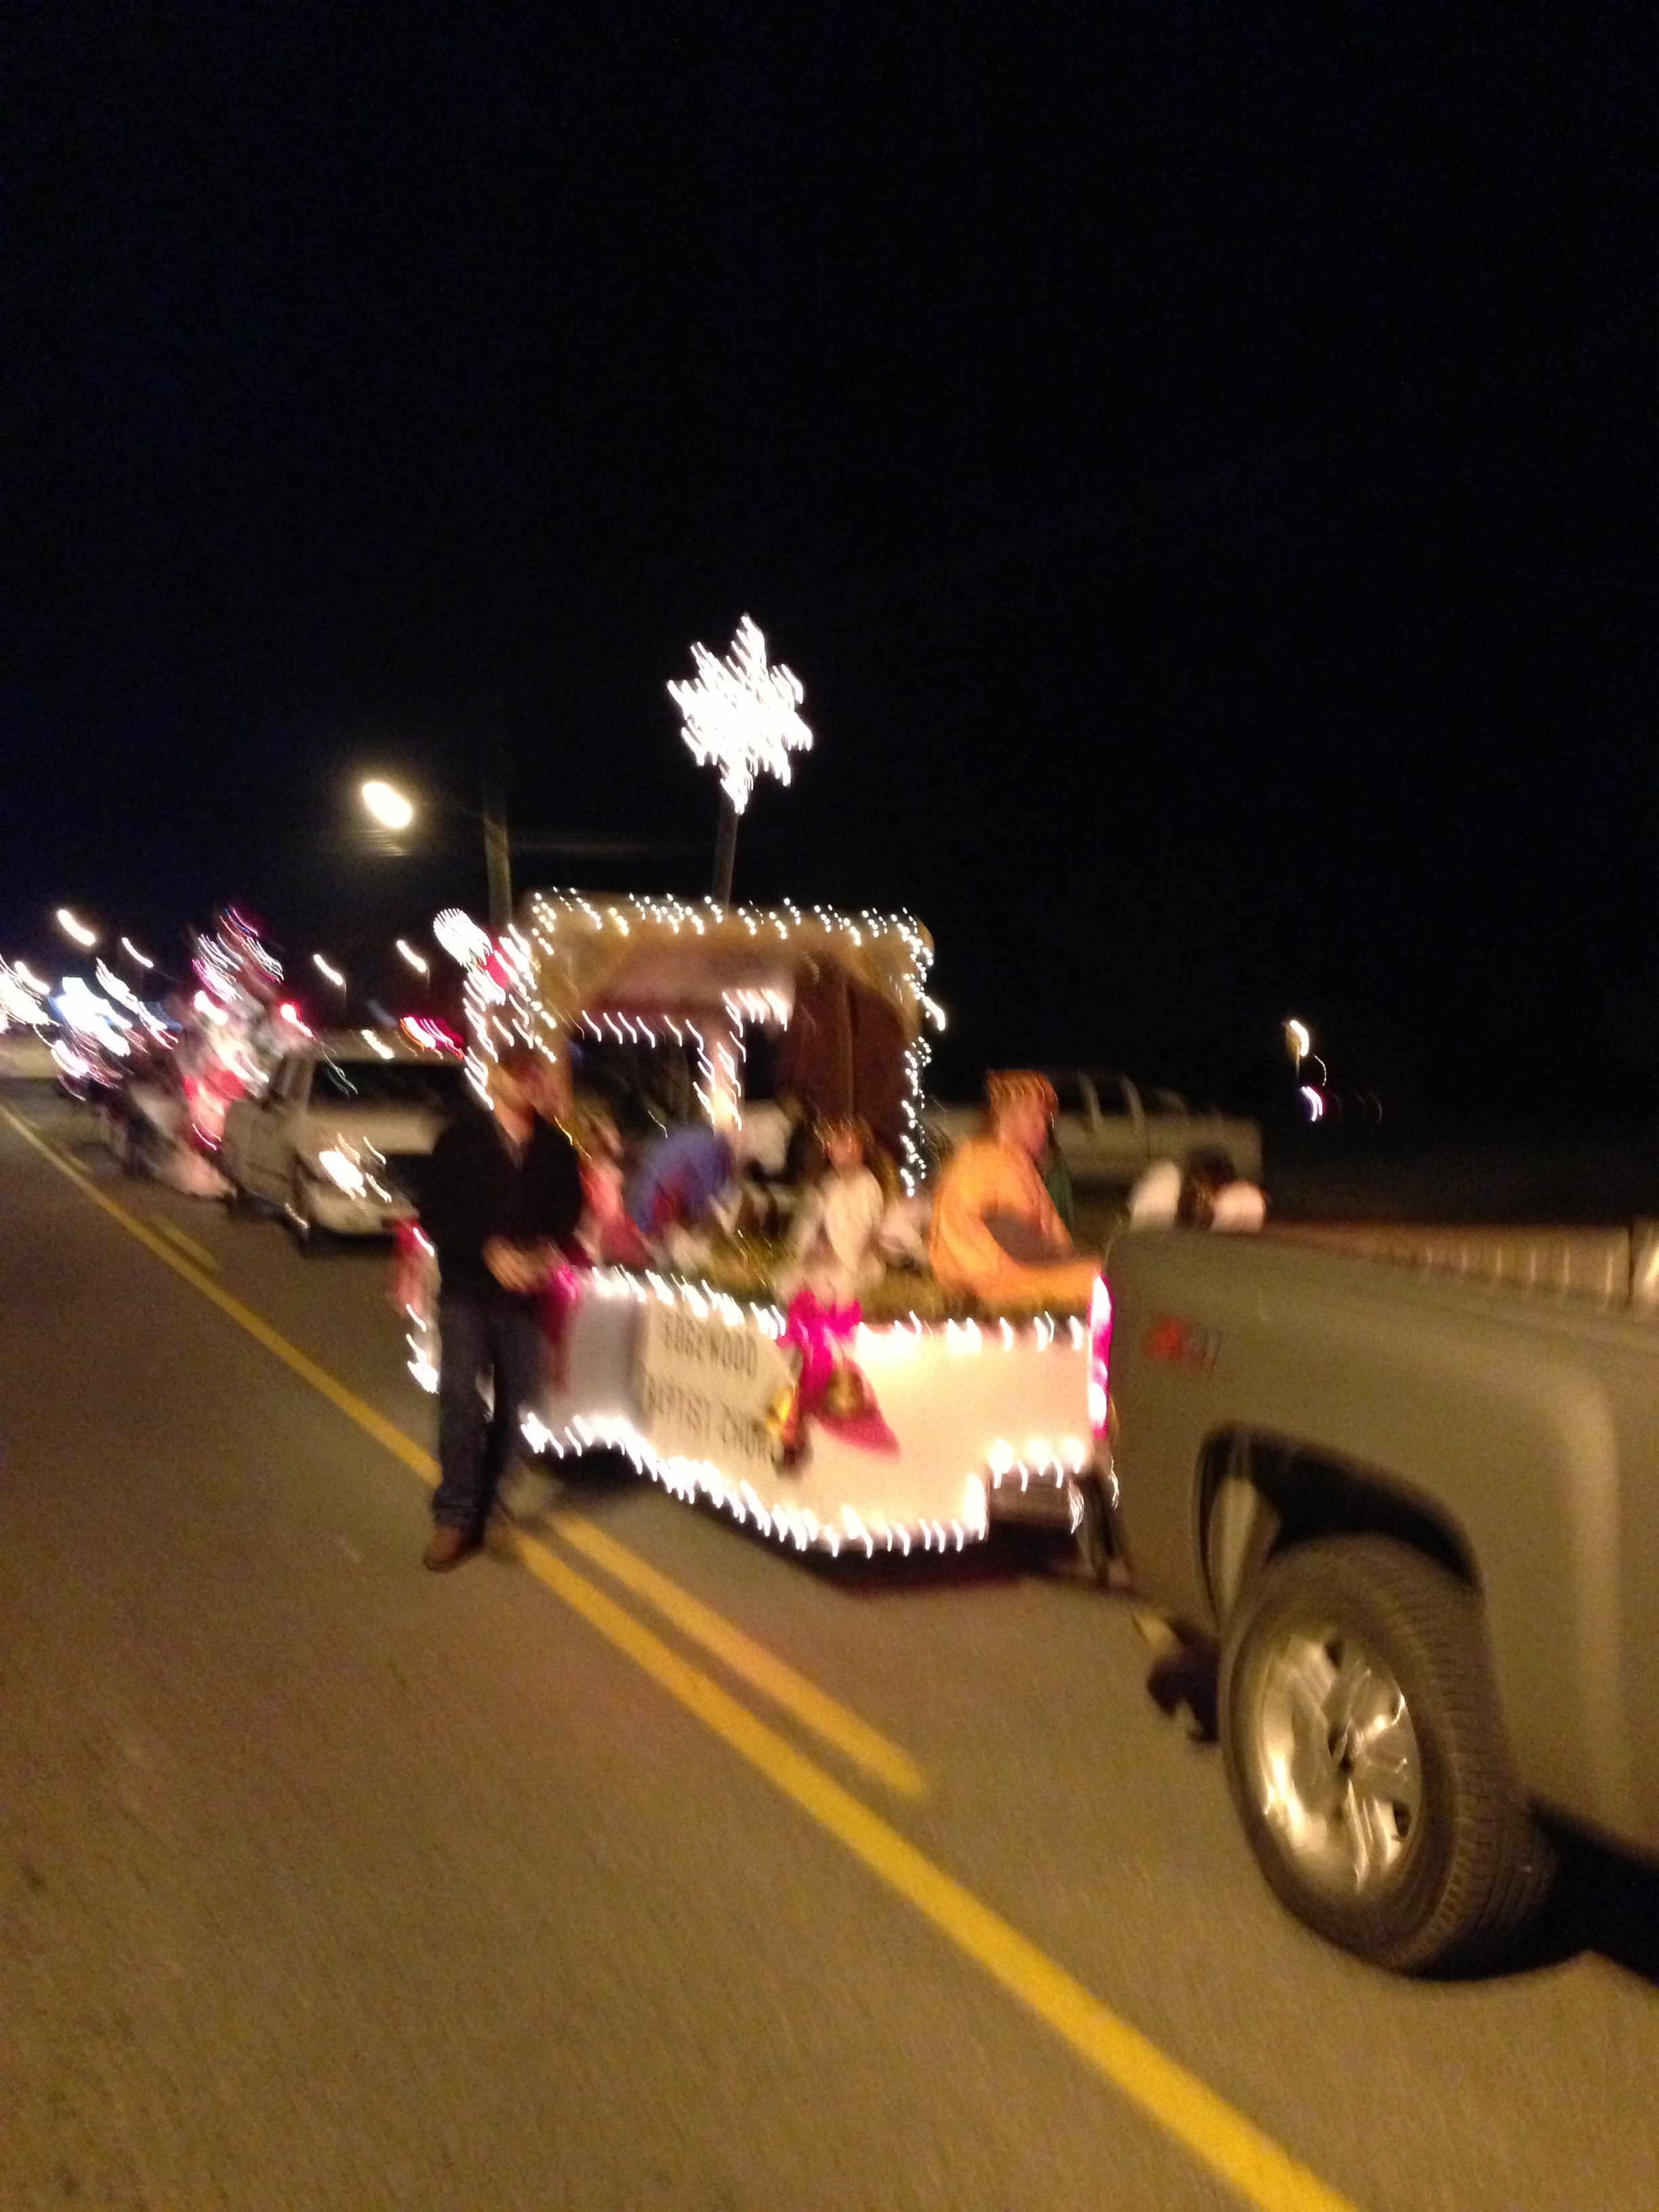 Not the best shot - the float in the parade